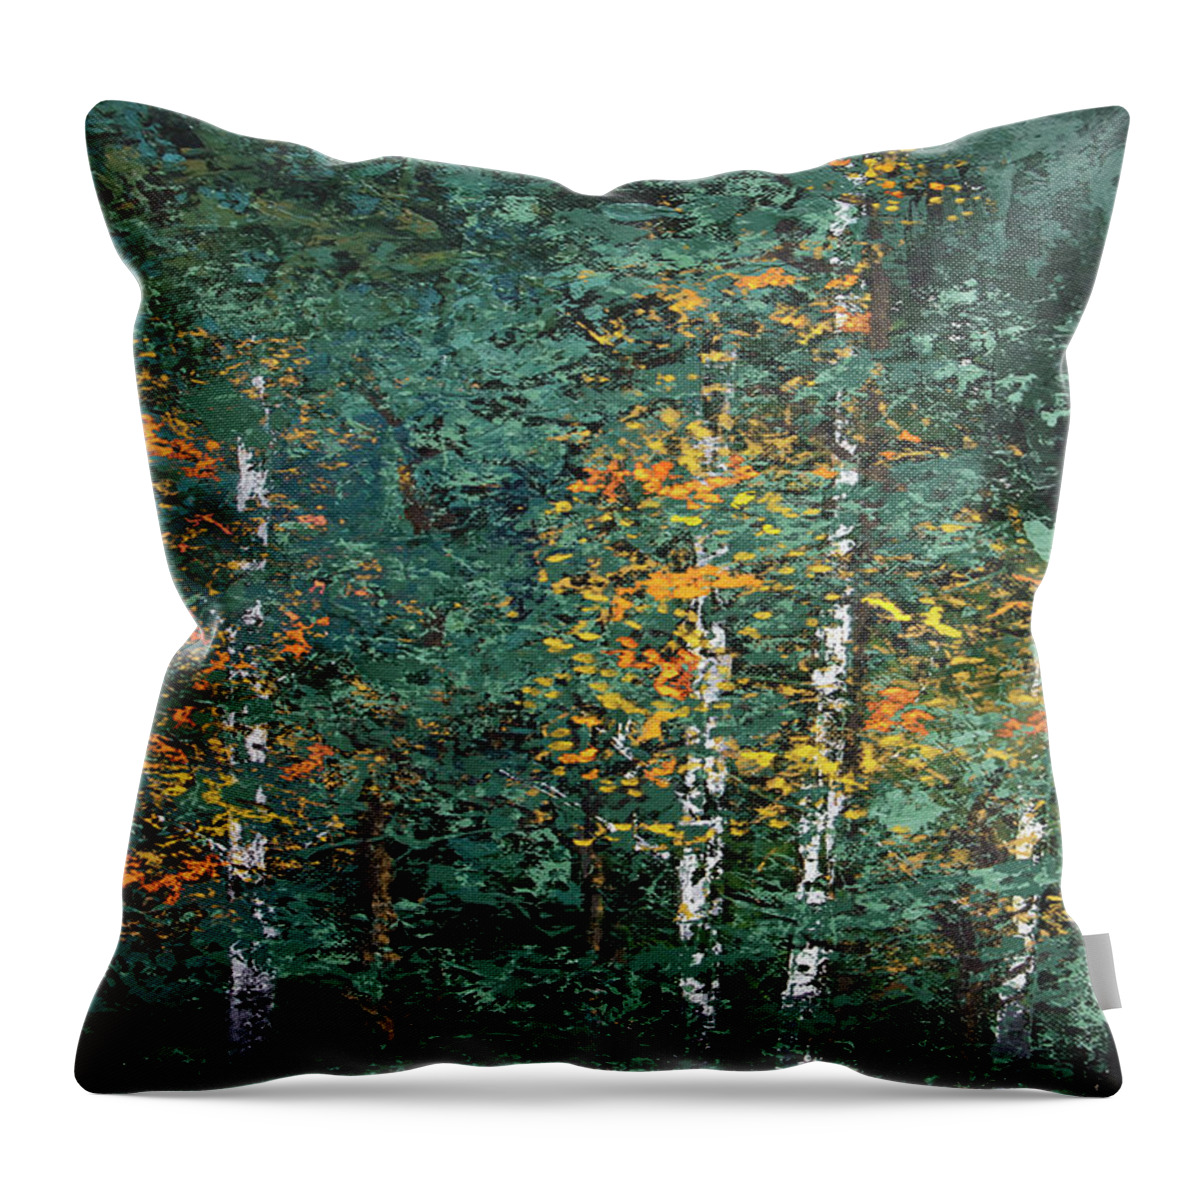 Landscape Throw Pillow featuring the painting A Quiet Place by Linda Bailey